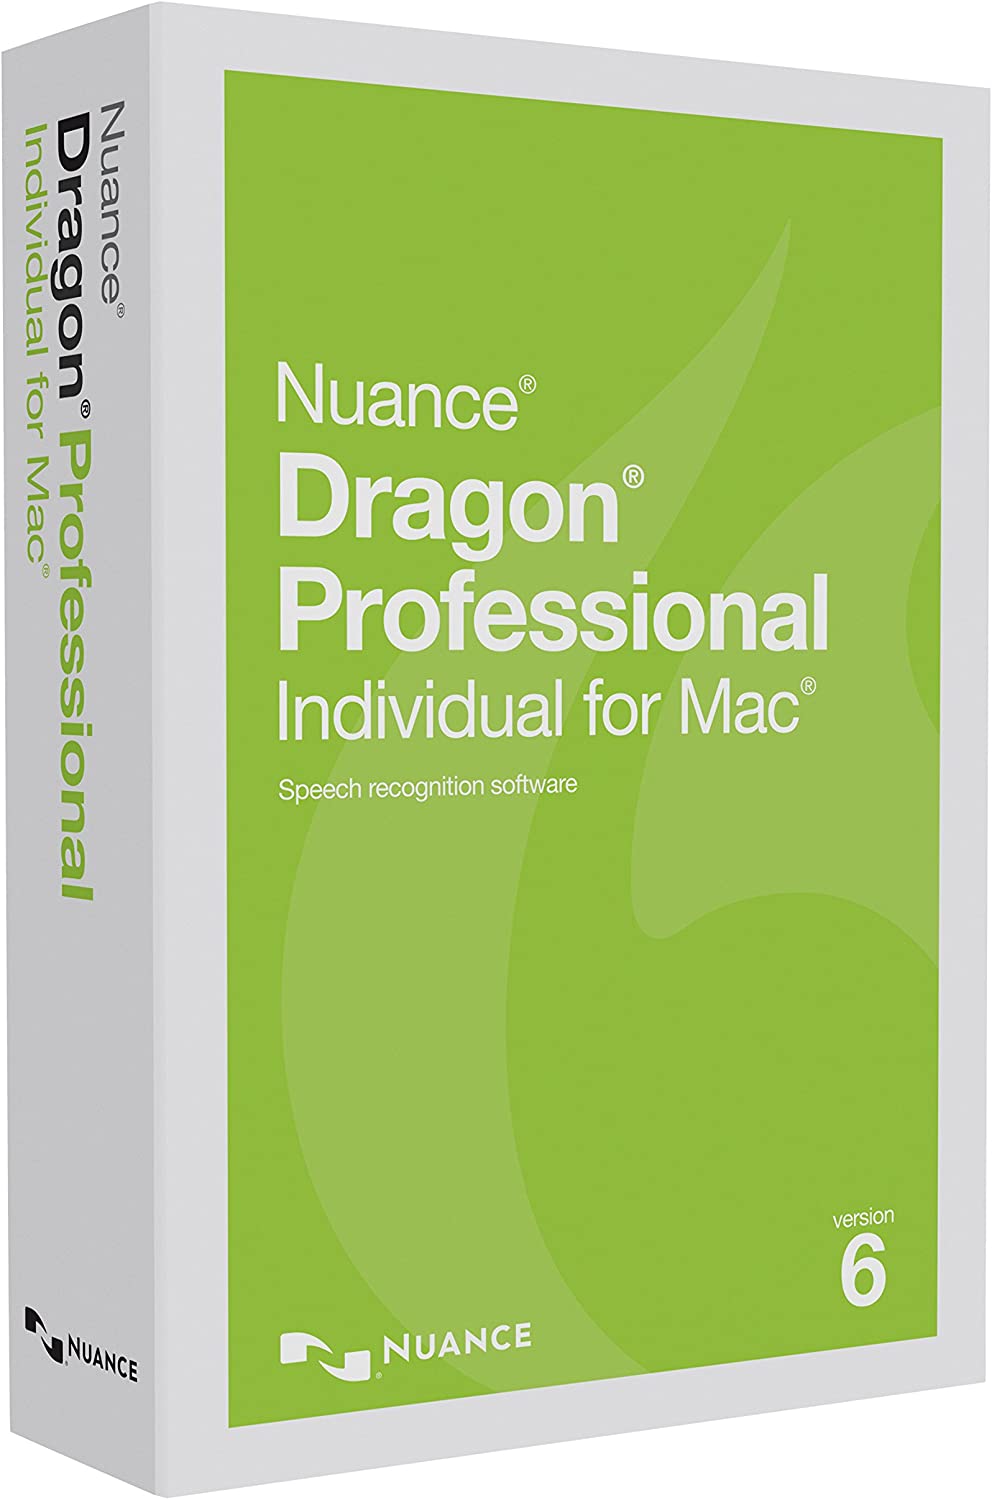 Nuance dragon professional individual 6.0 for mac download